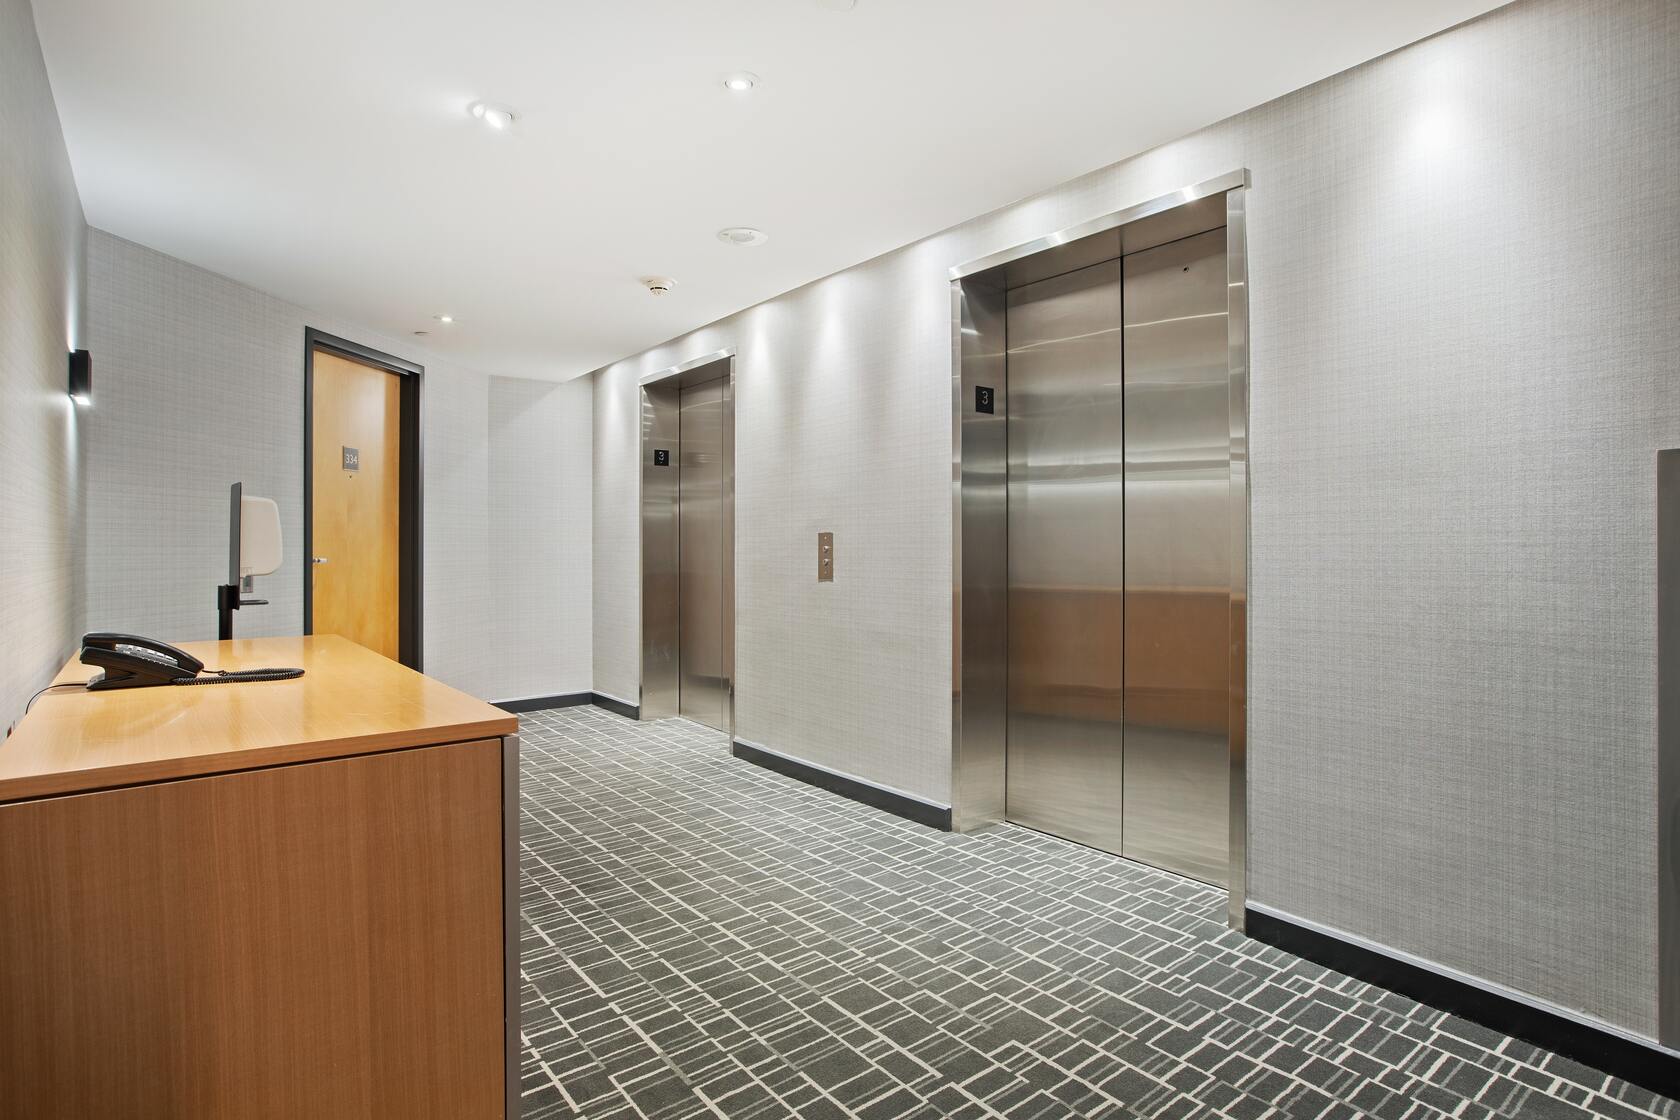 Palm Beach Elevator Access Control Systems